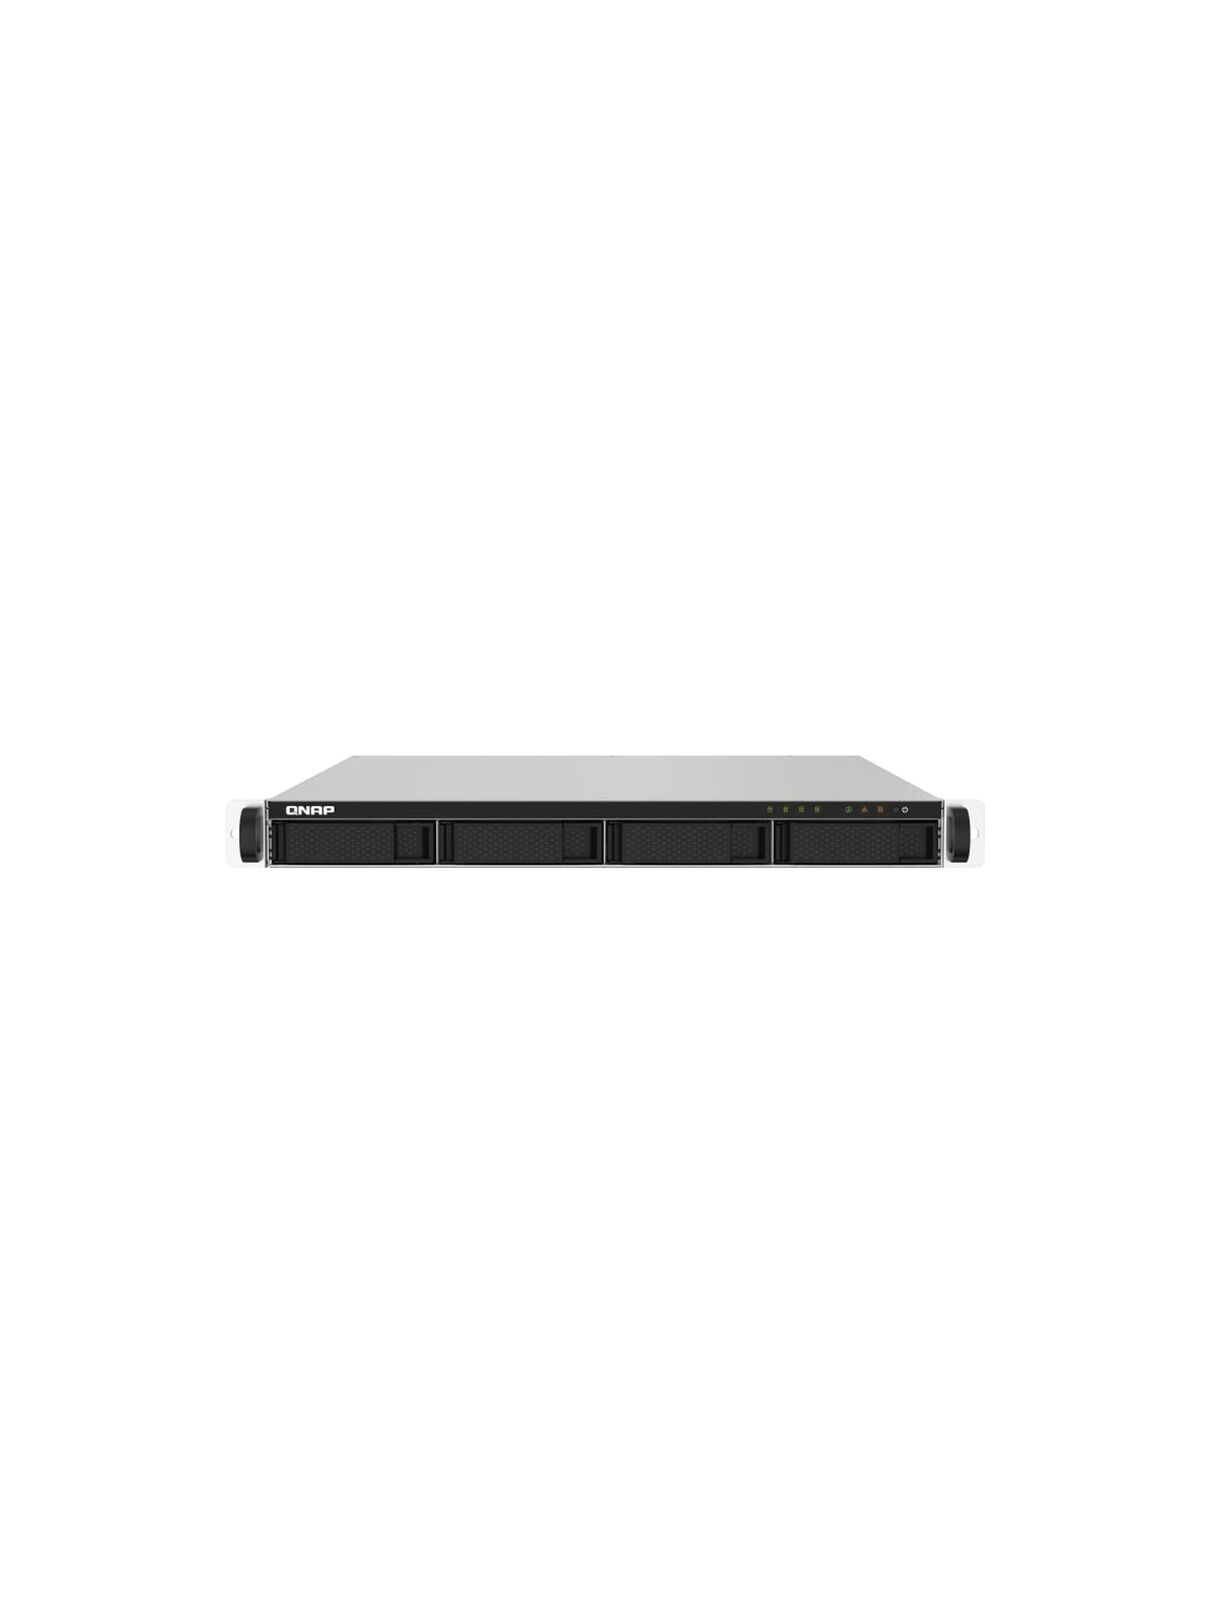 QNAP TS-432PXU-RP-2G 4 Bay High-Speed SMB Rackmount NAS with Two 10GbE and 2....